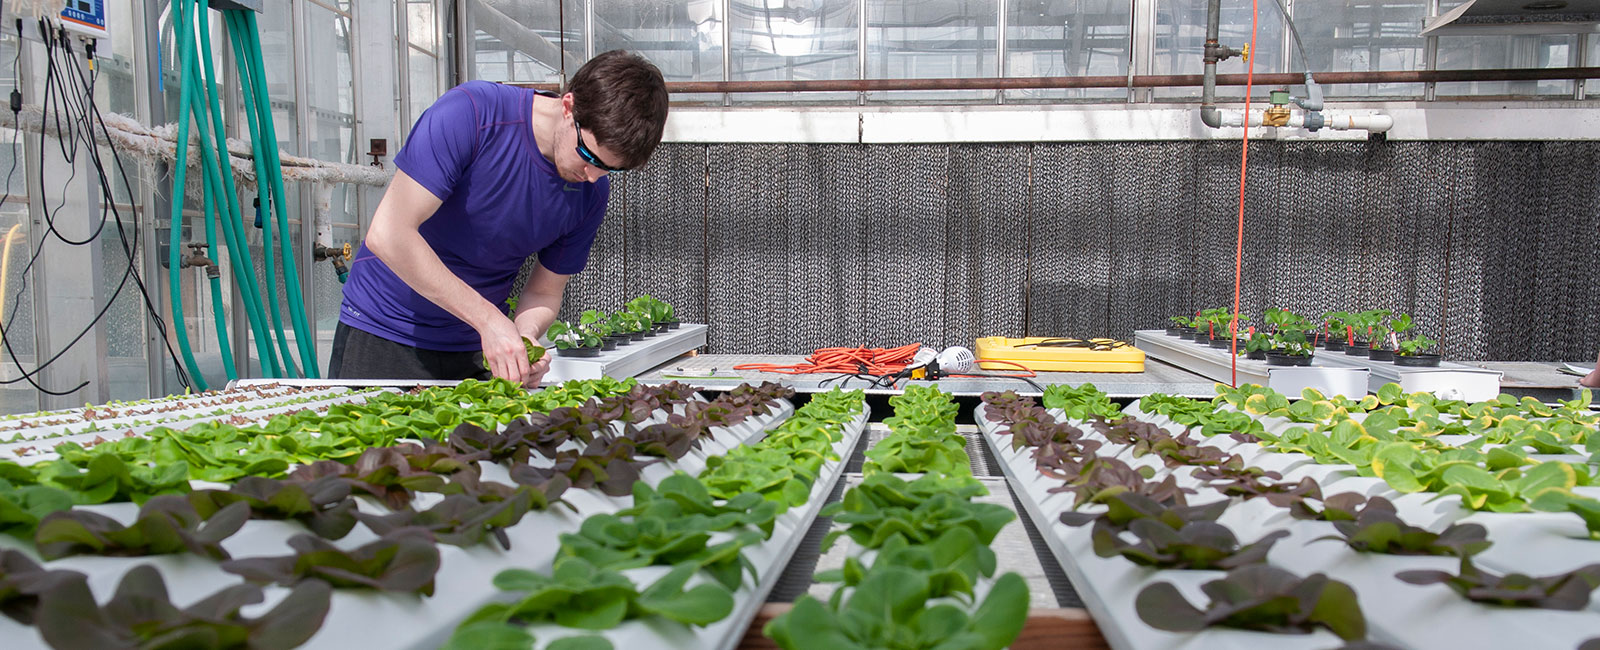 Horticulture student working in a greenhouse filled with rows of plants